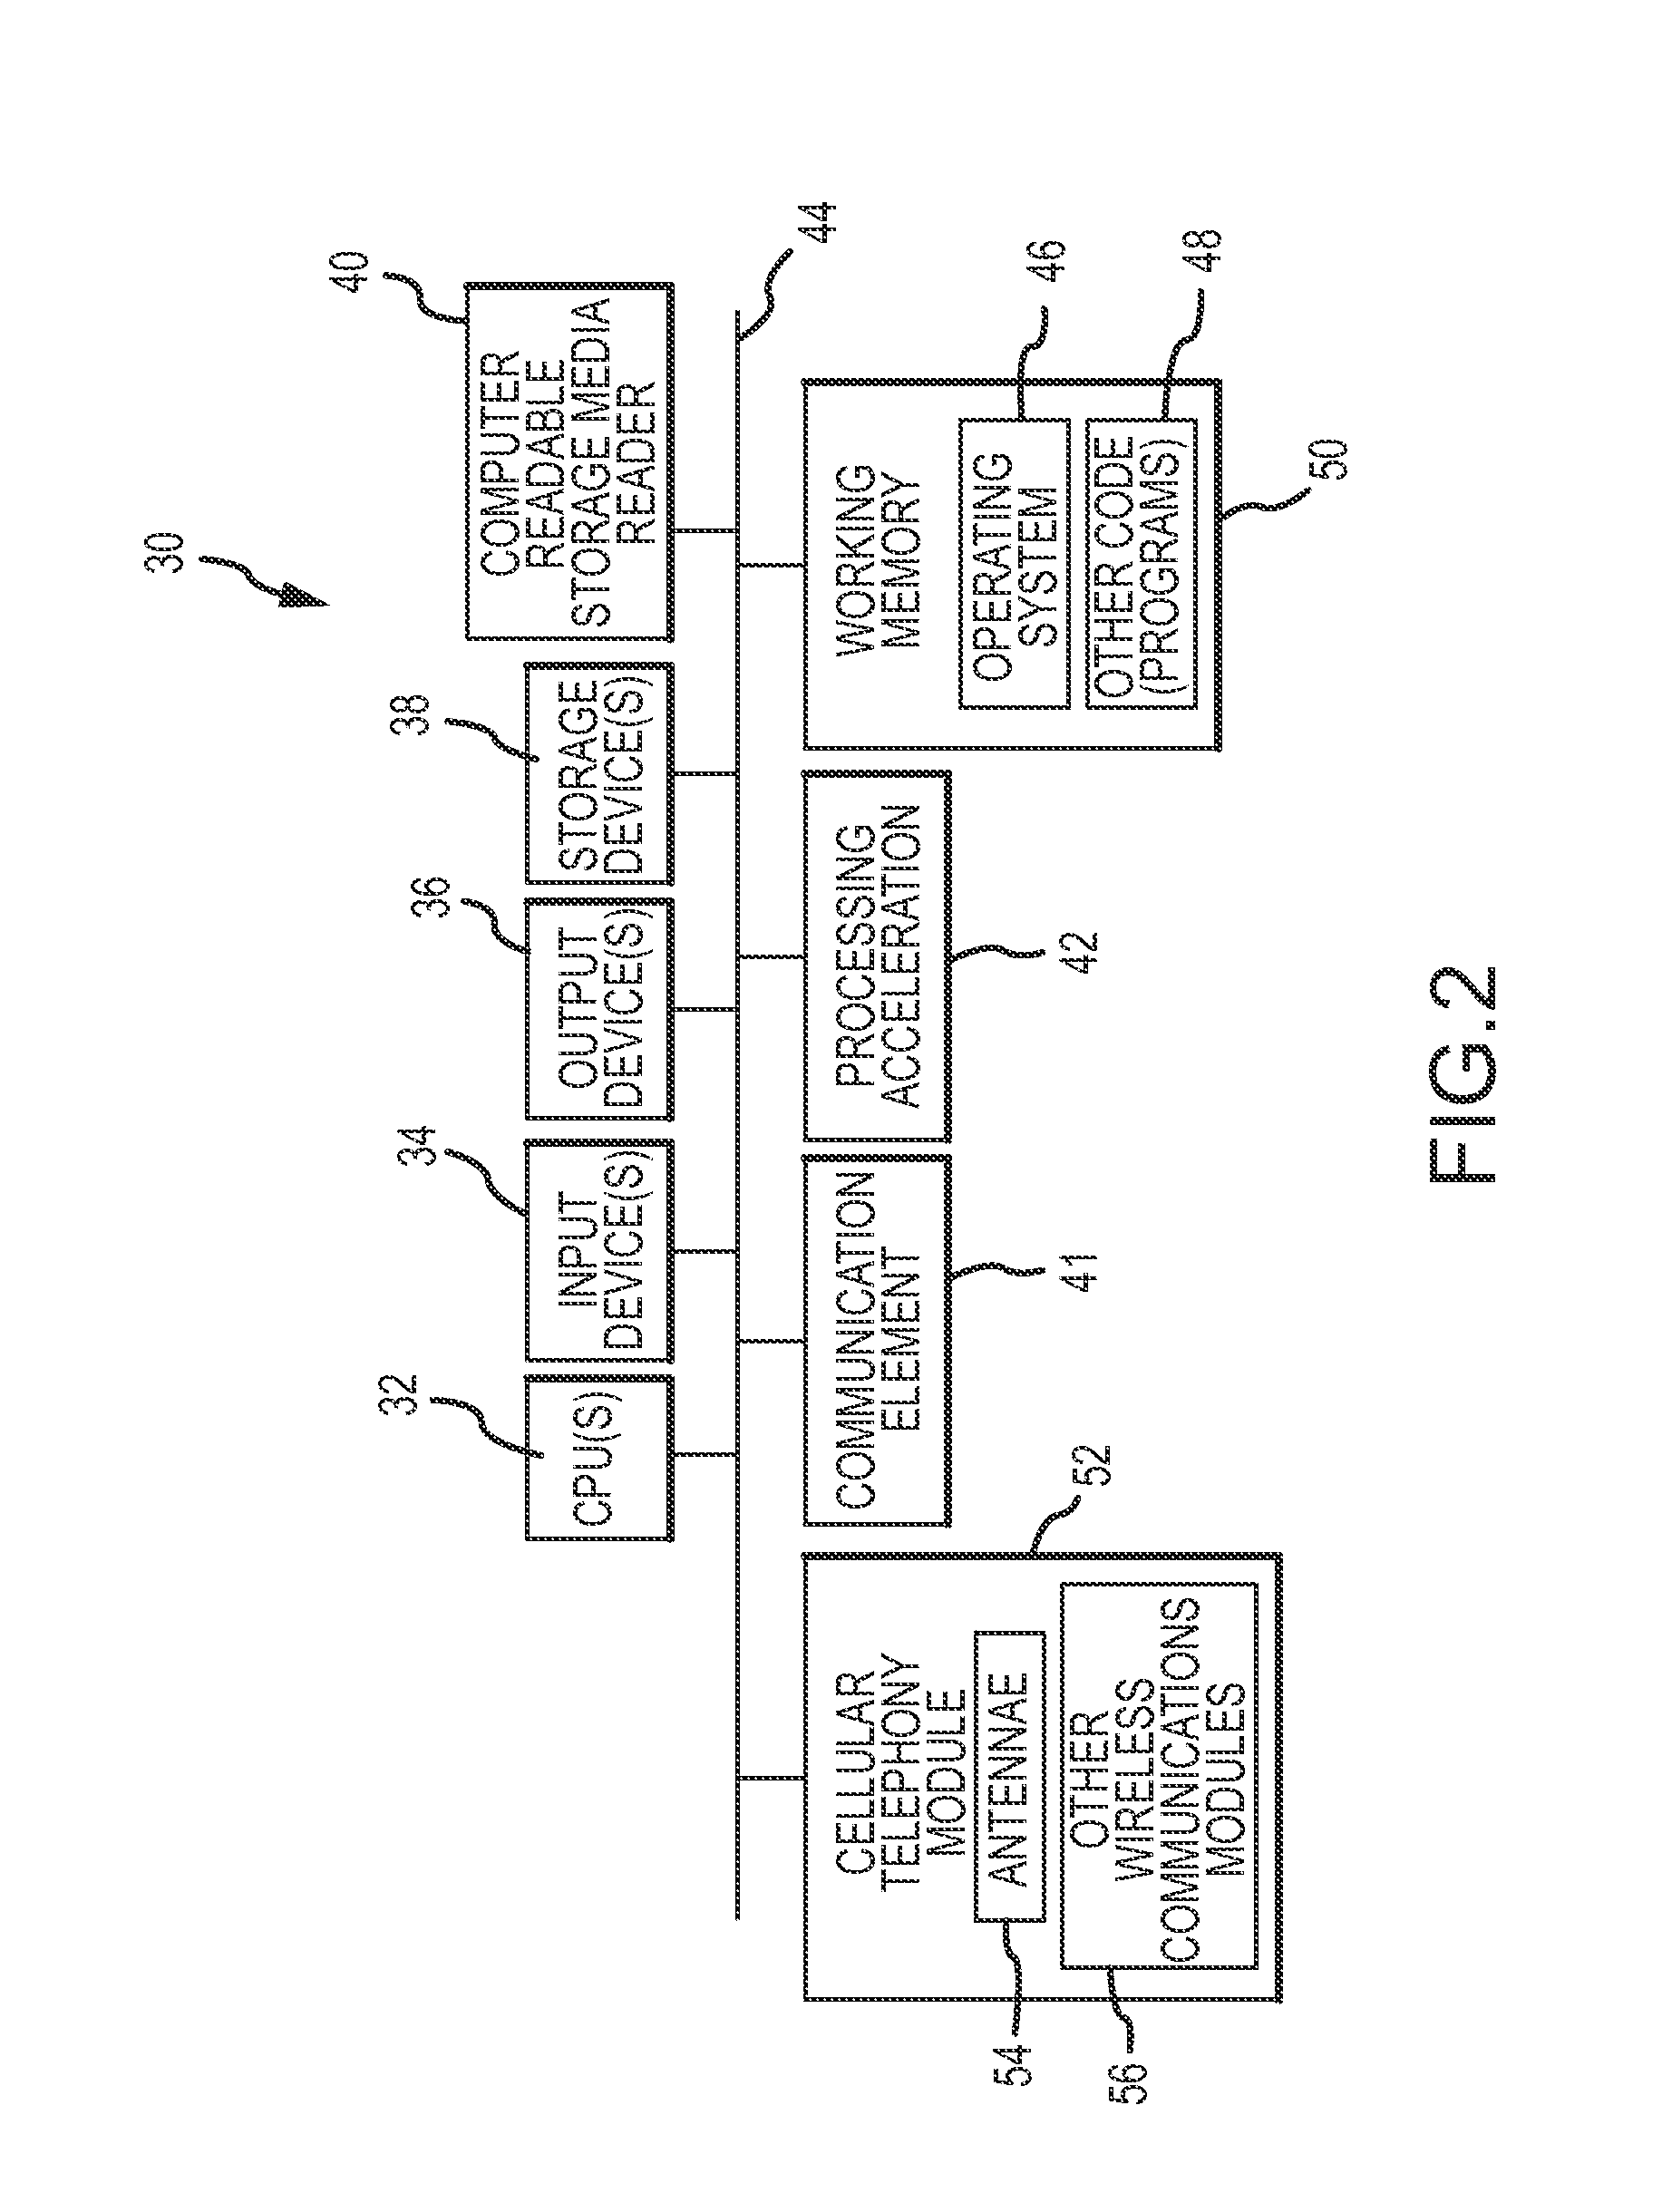 System and method for determining the state of a beverage